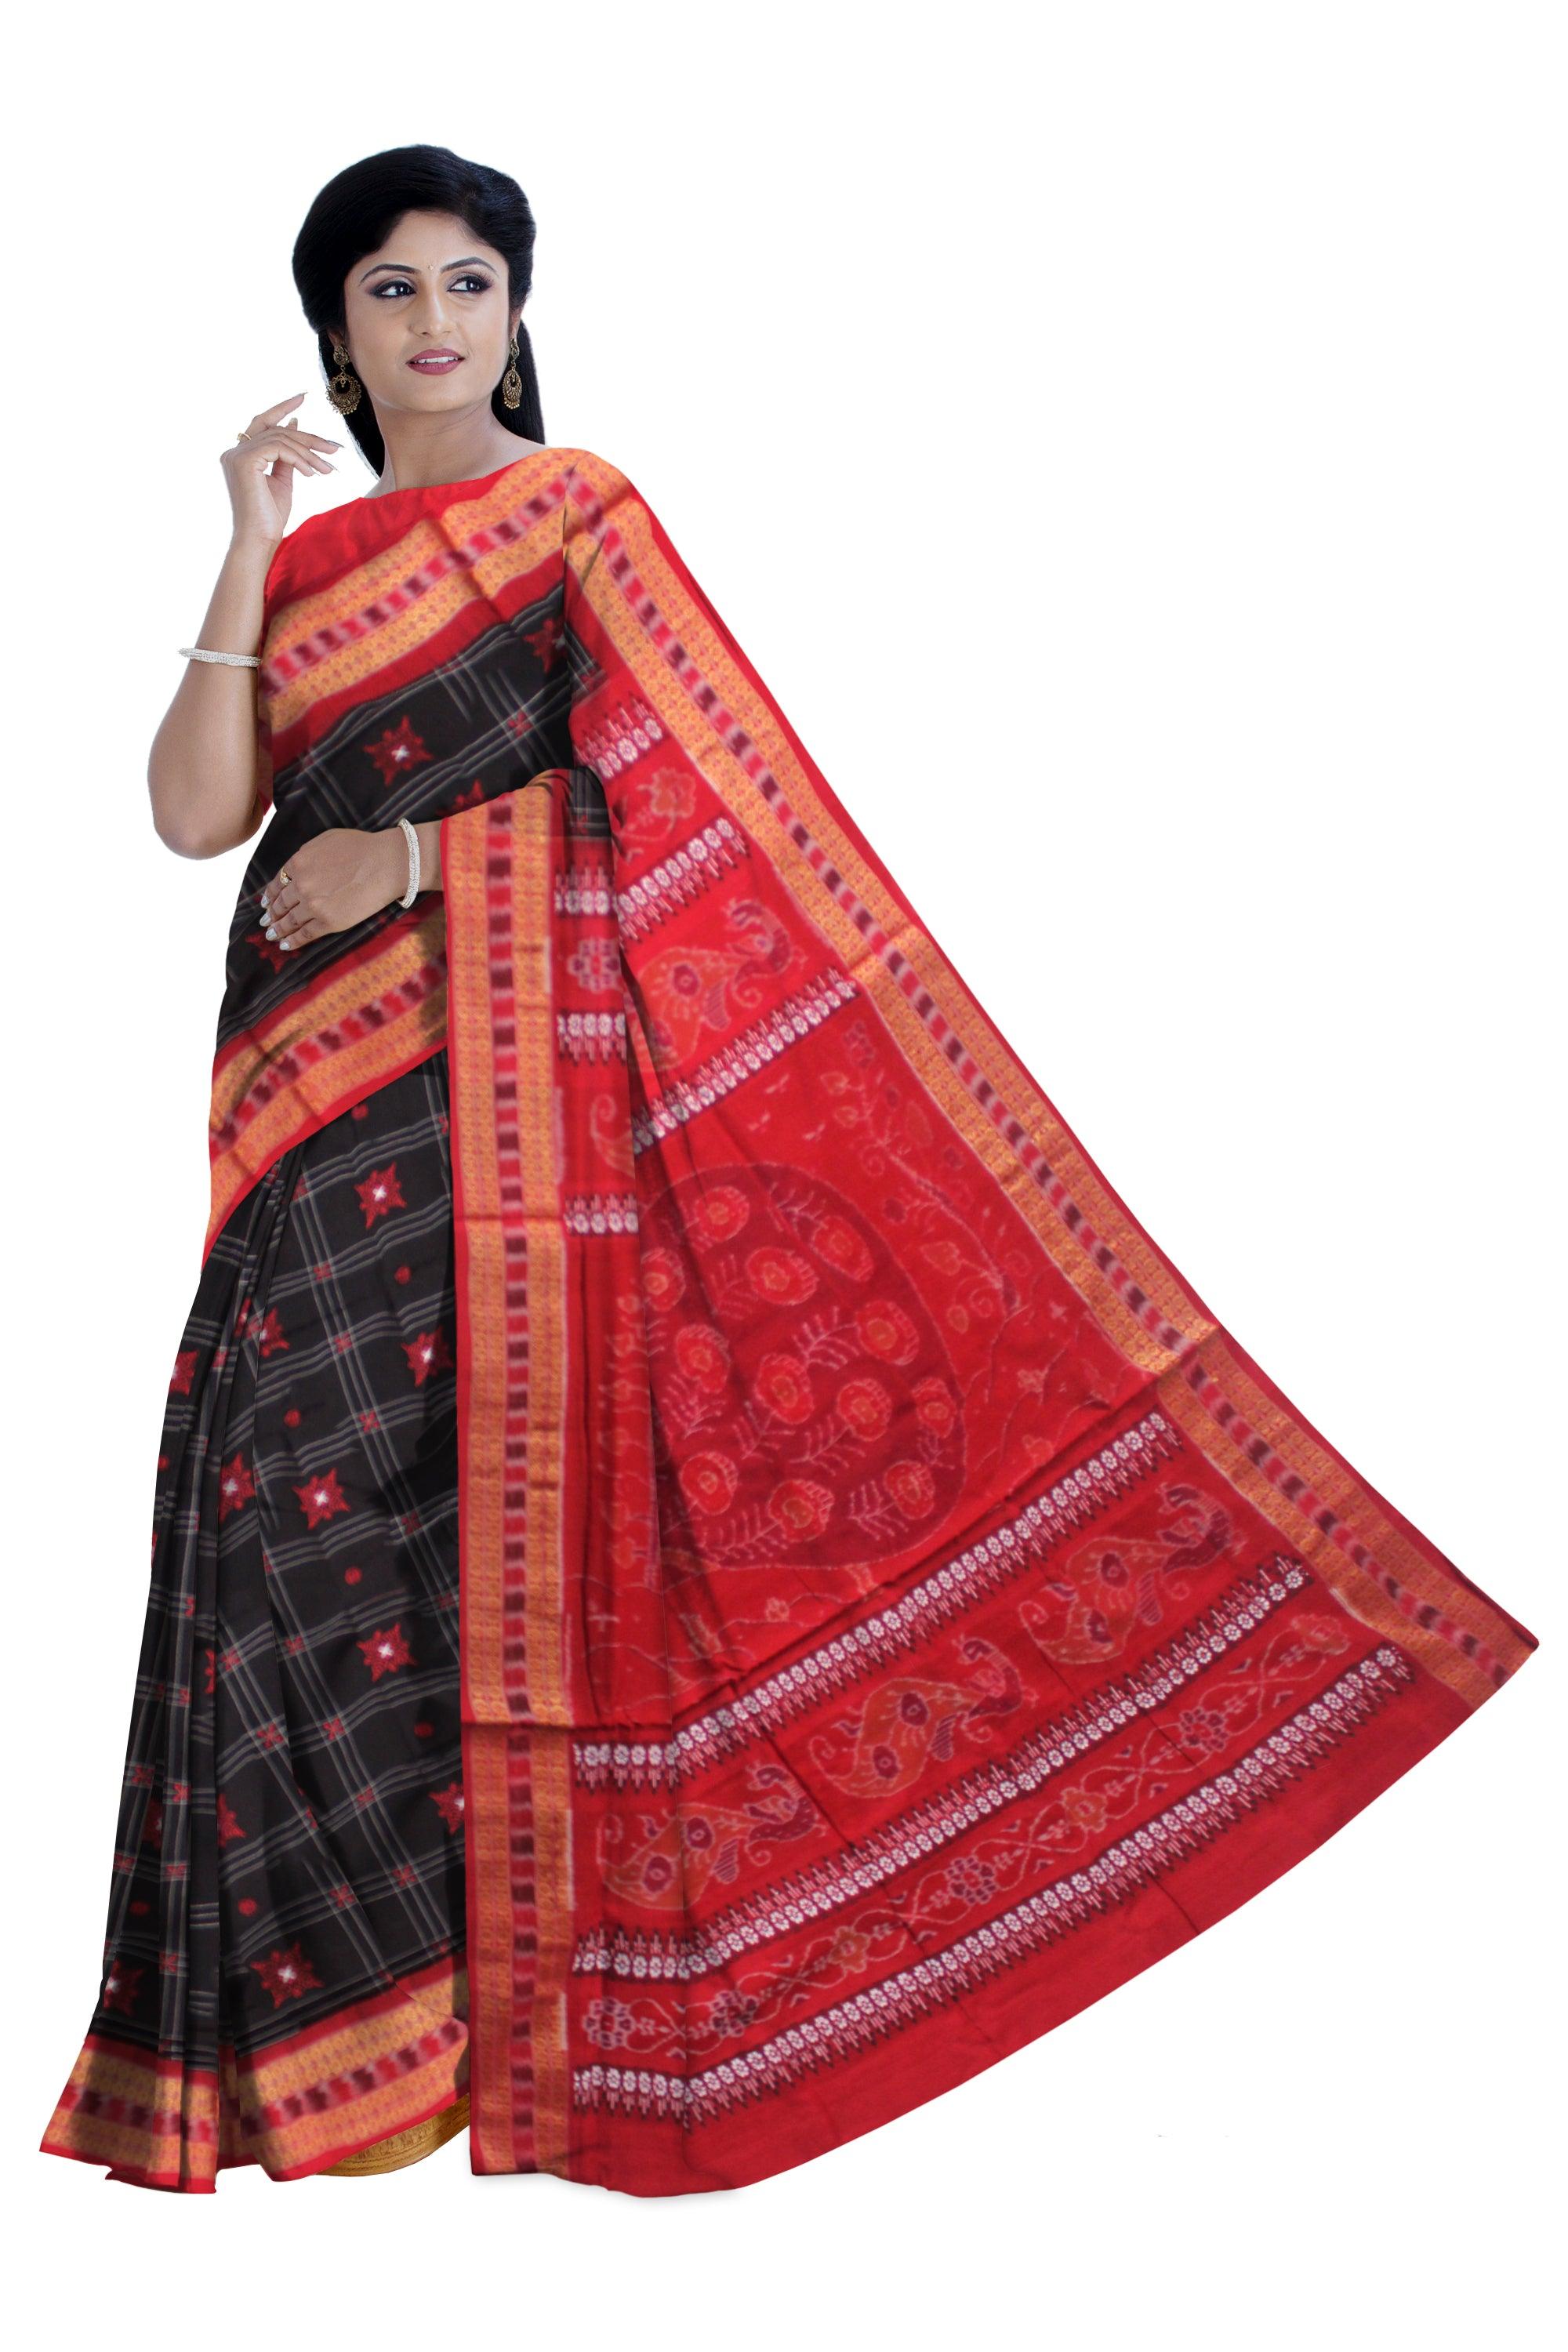 NEW DESIGN  BOMKEI PATTERN COTTON SAREE IN   MODERN BLACK AND RED  COLOR BASE, ATTACHED WITH  BLOUSE PIECE. - Koshali Arts & Crafts Enterprise